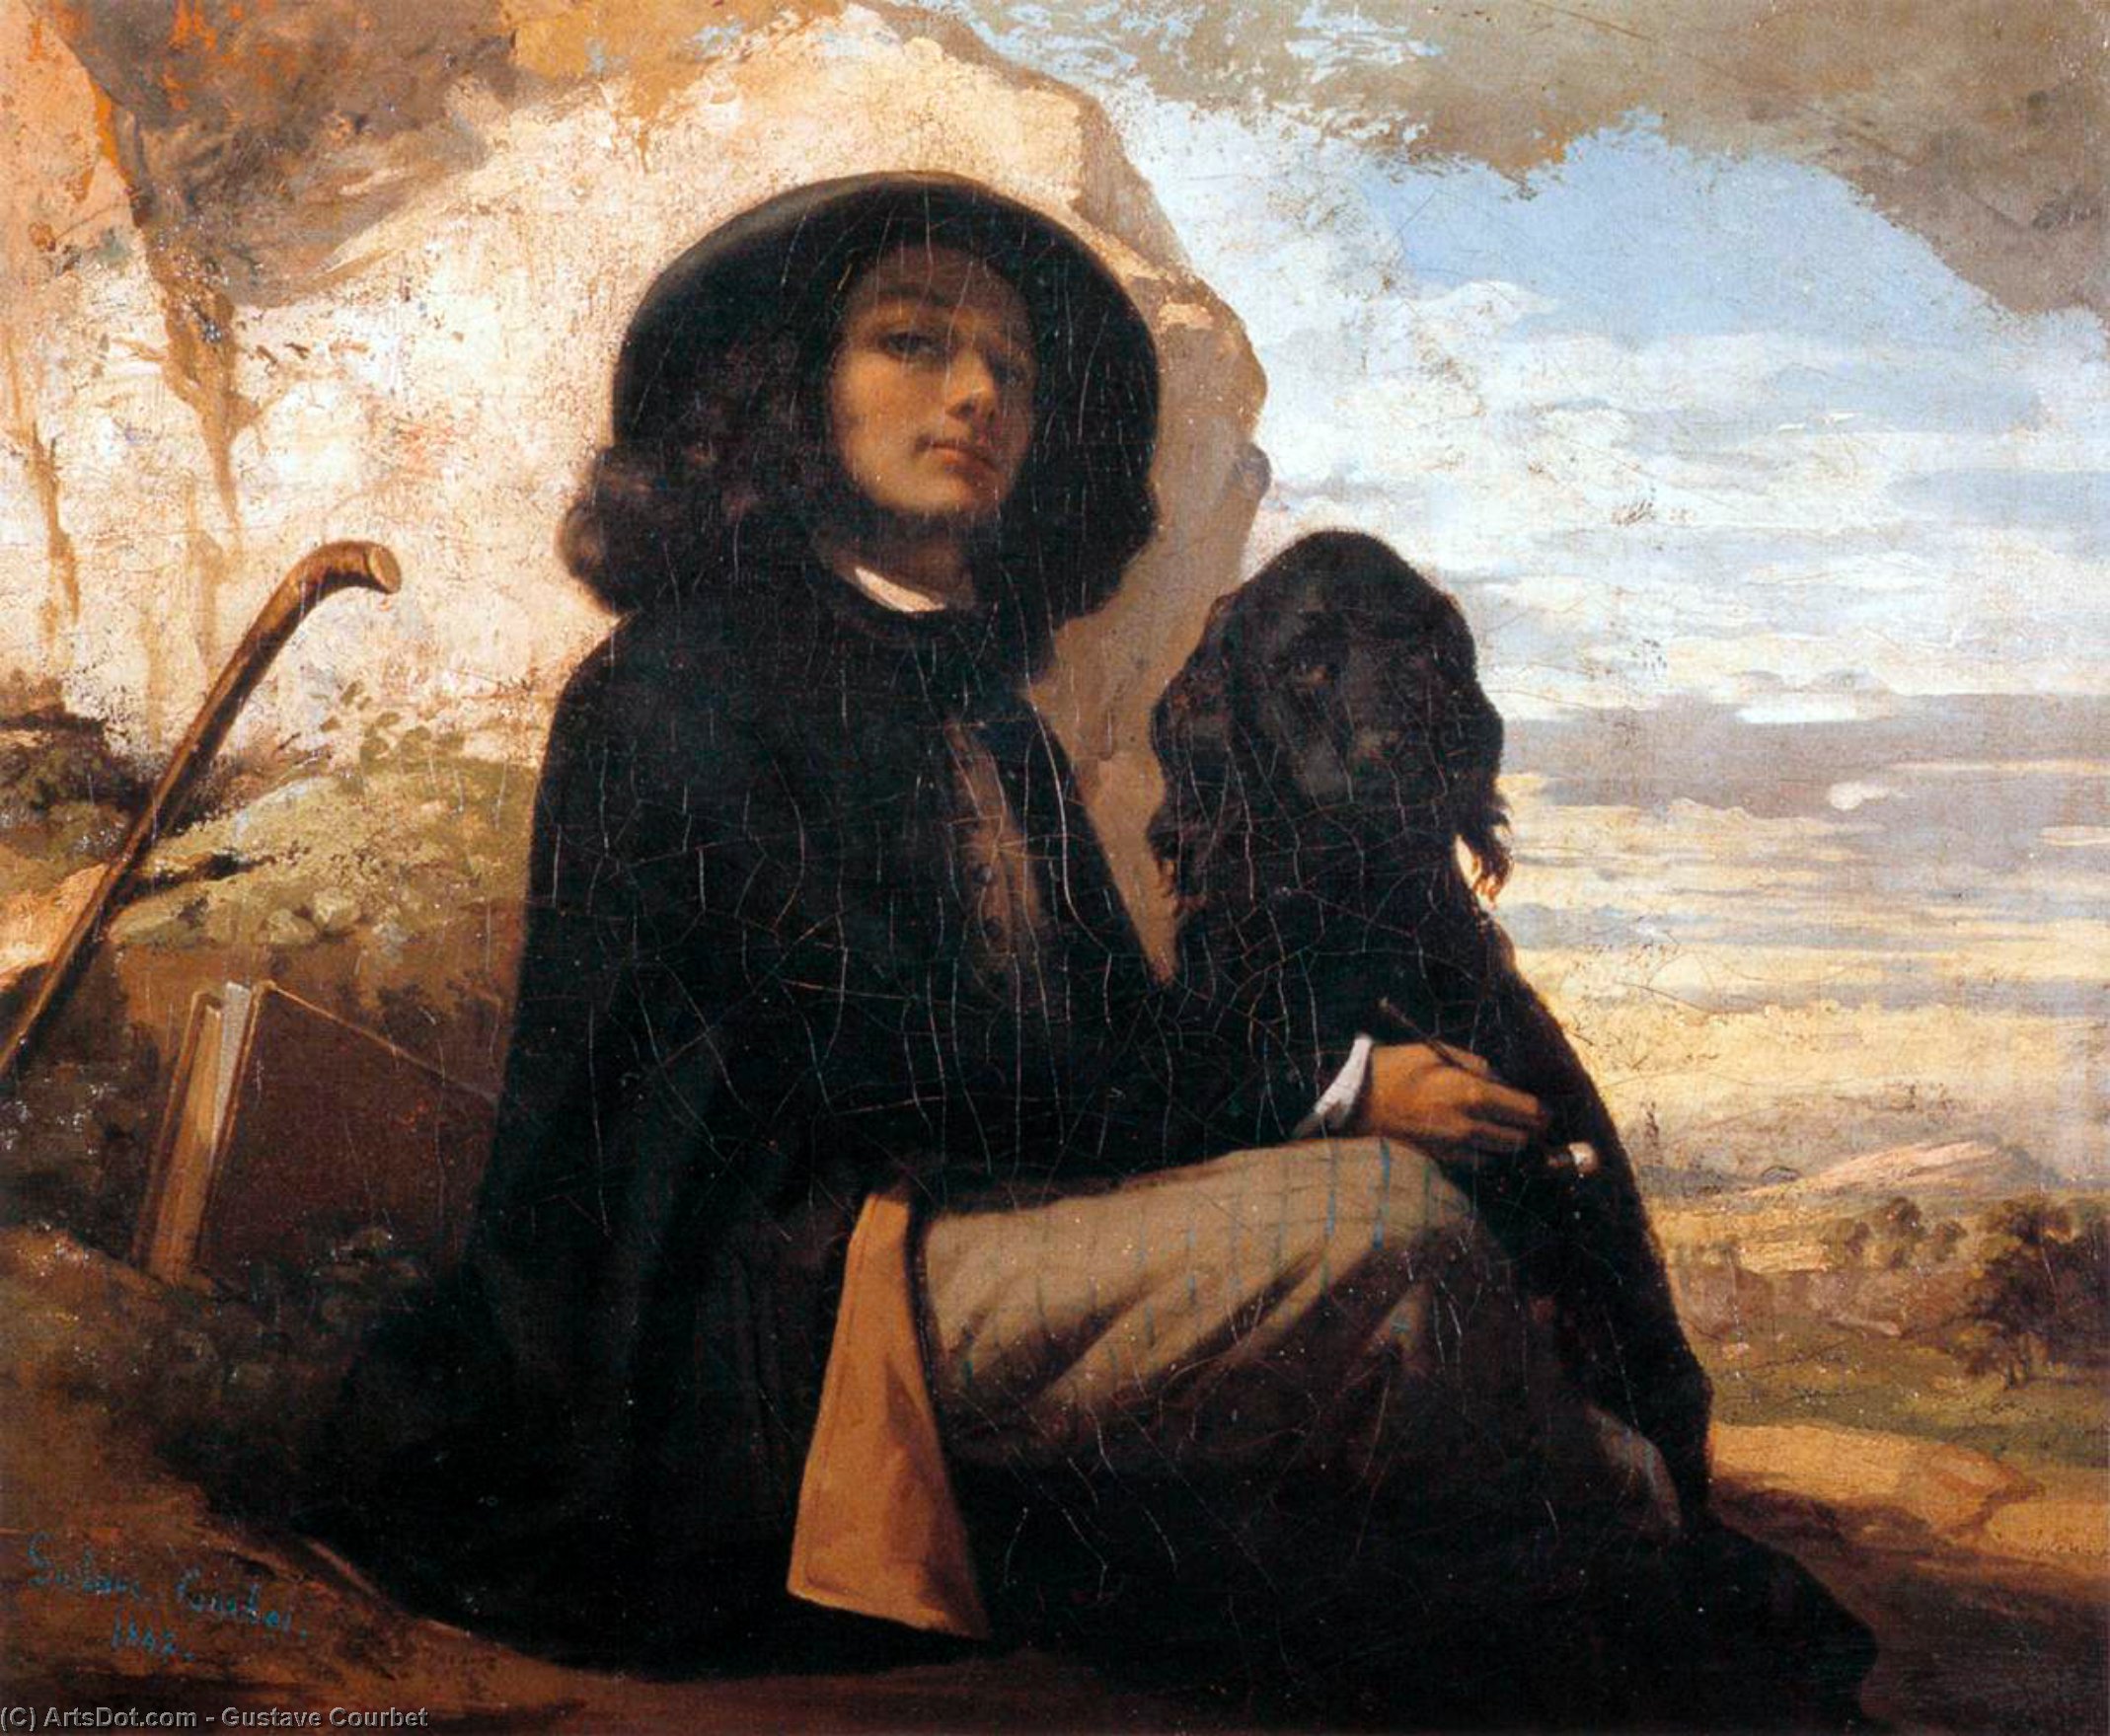 WikiOO.org - 백과 사전 - 회화, 삽화 Gustave Courbet - Self-Portrait with a Black Dog